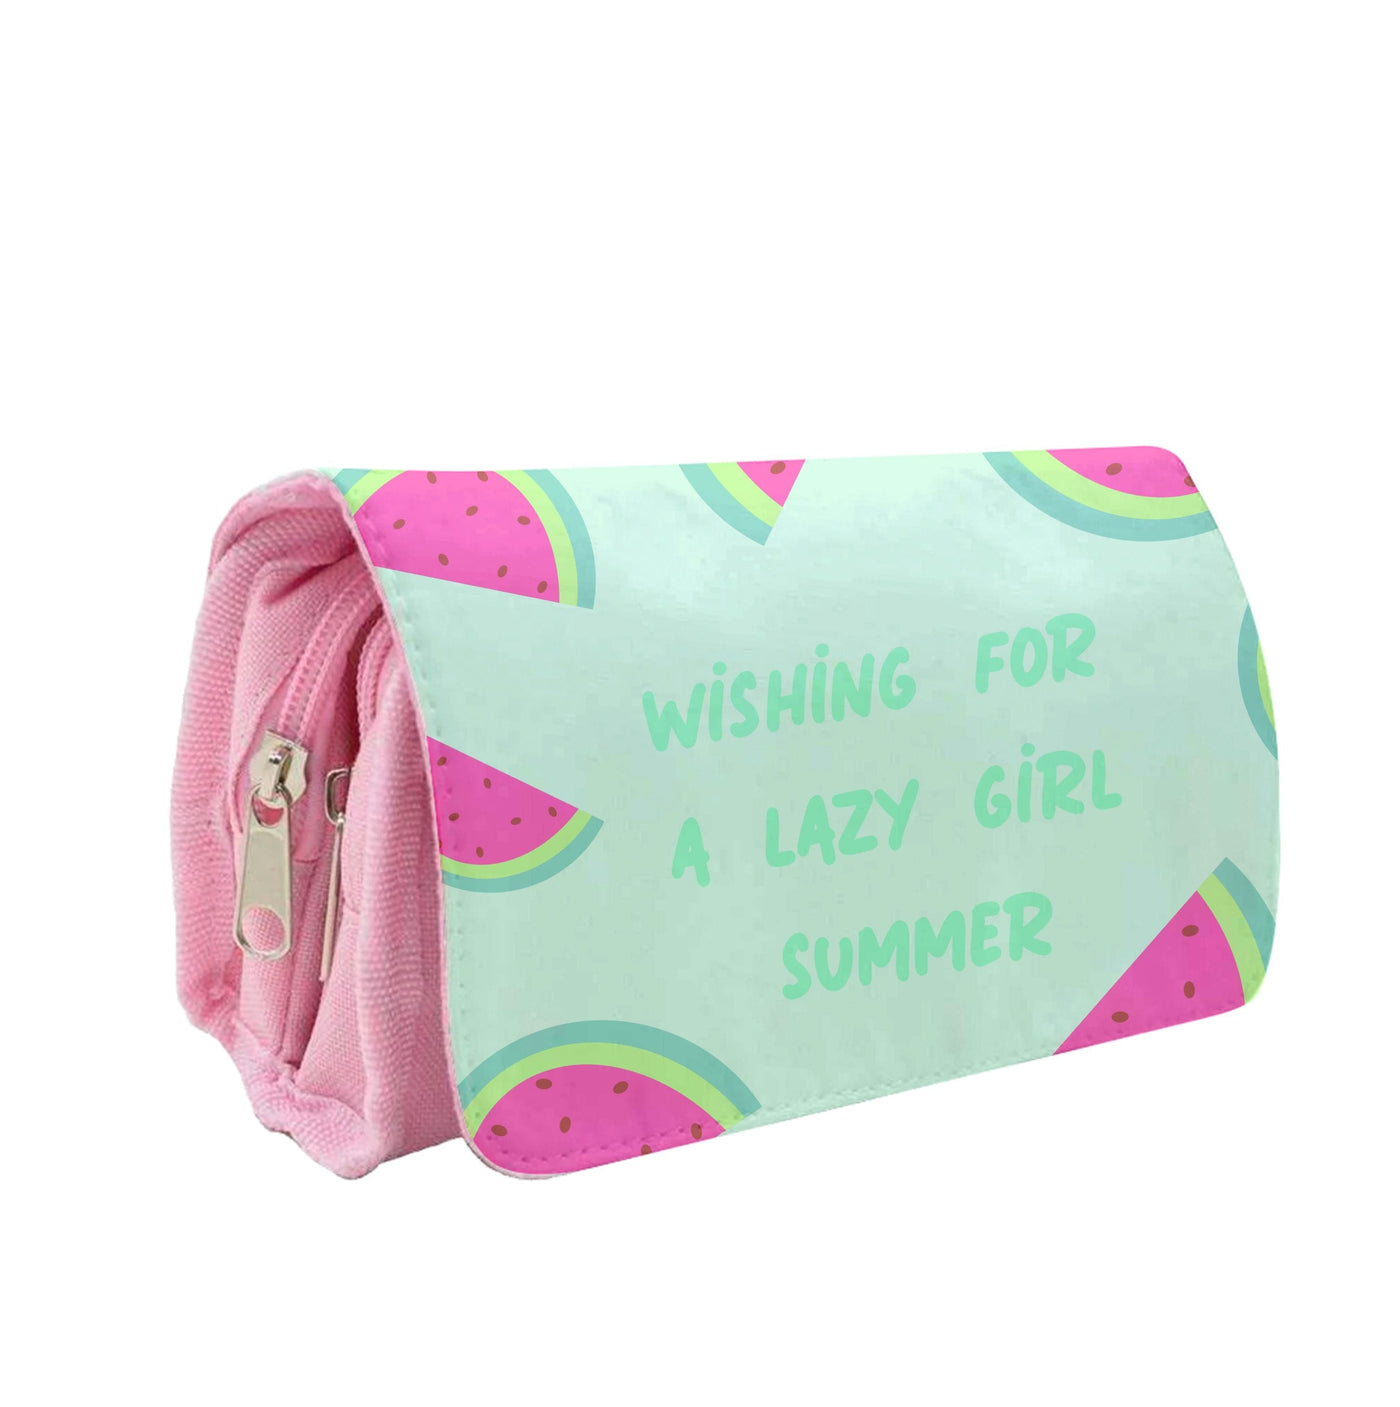 Wishing For A Lazy Girl Summer - Summer Pencil Case